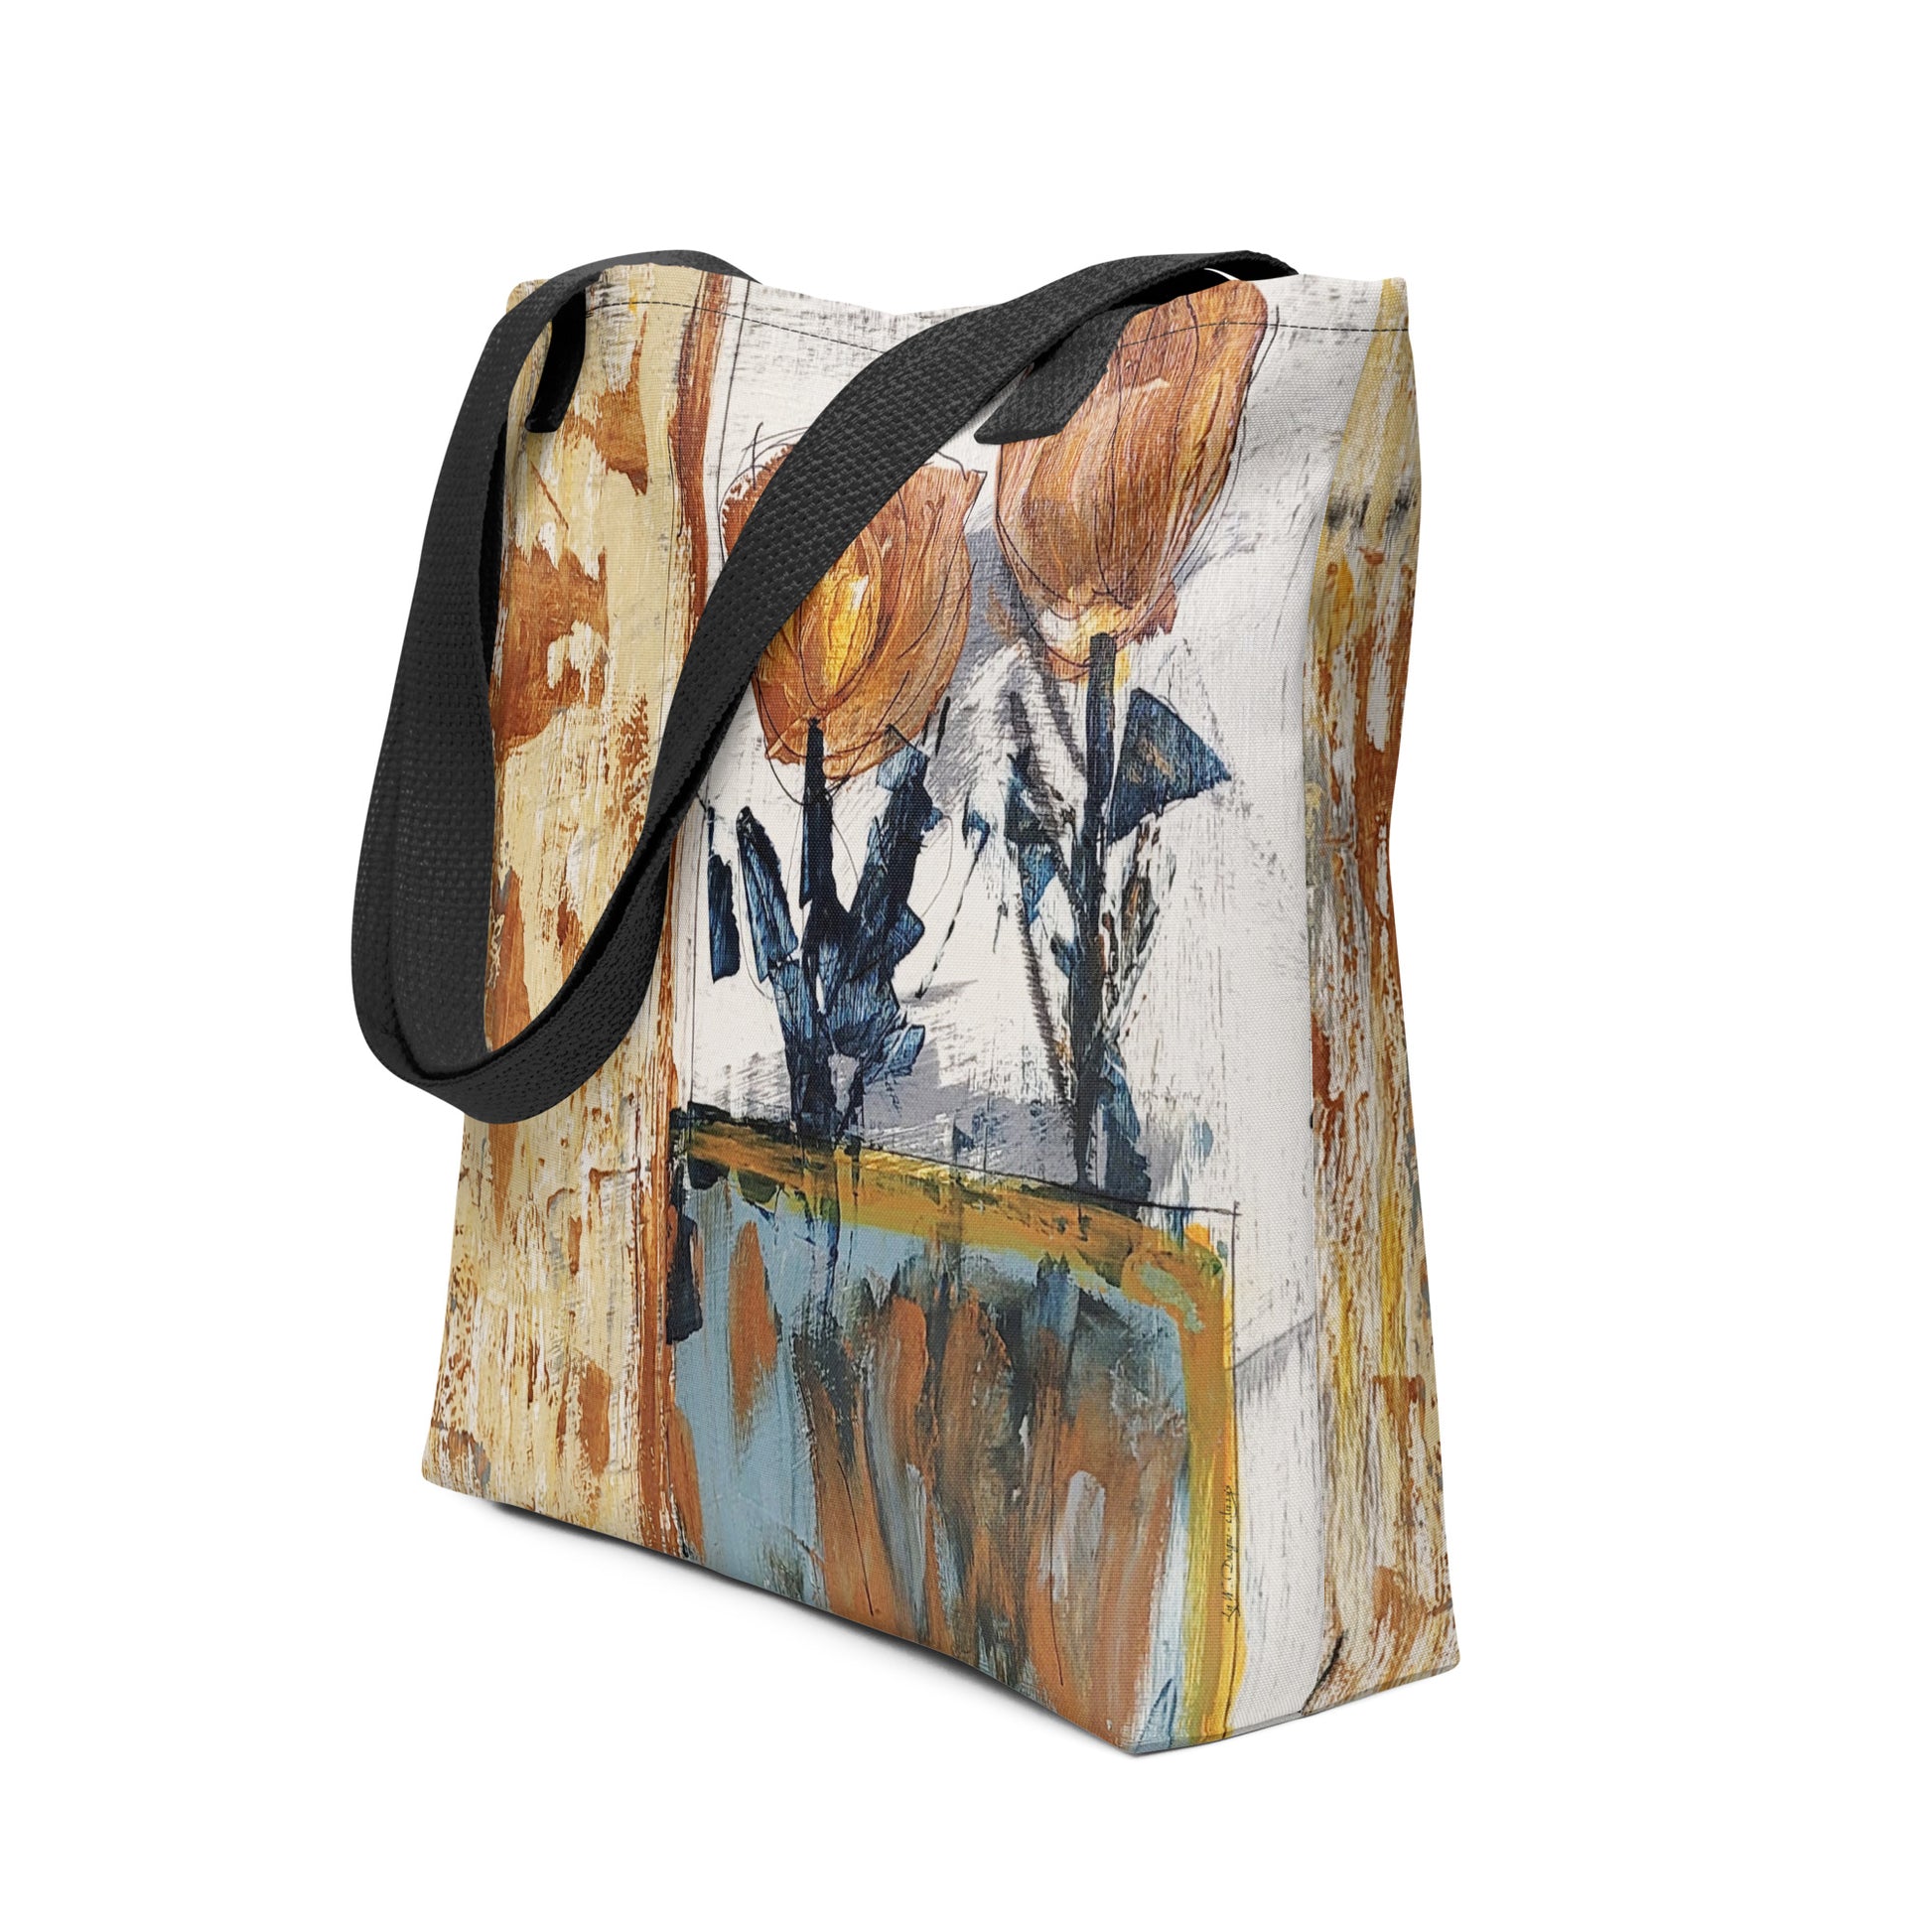 Original floral art in earth tone hues on spun polyester tote bag with black handles, by c.lizzy's.